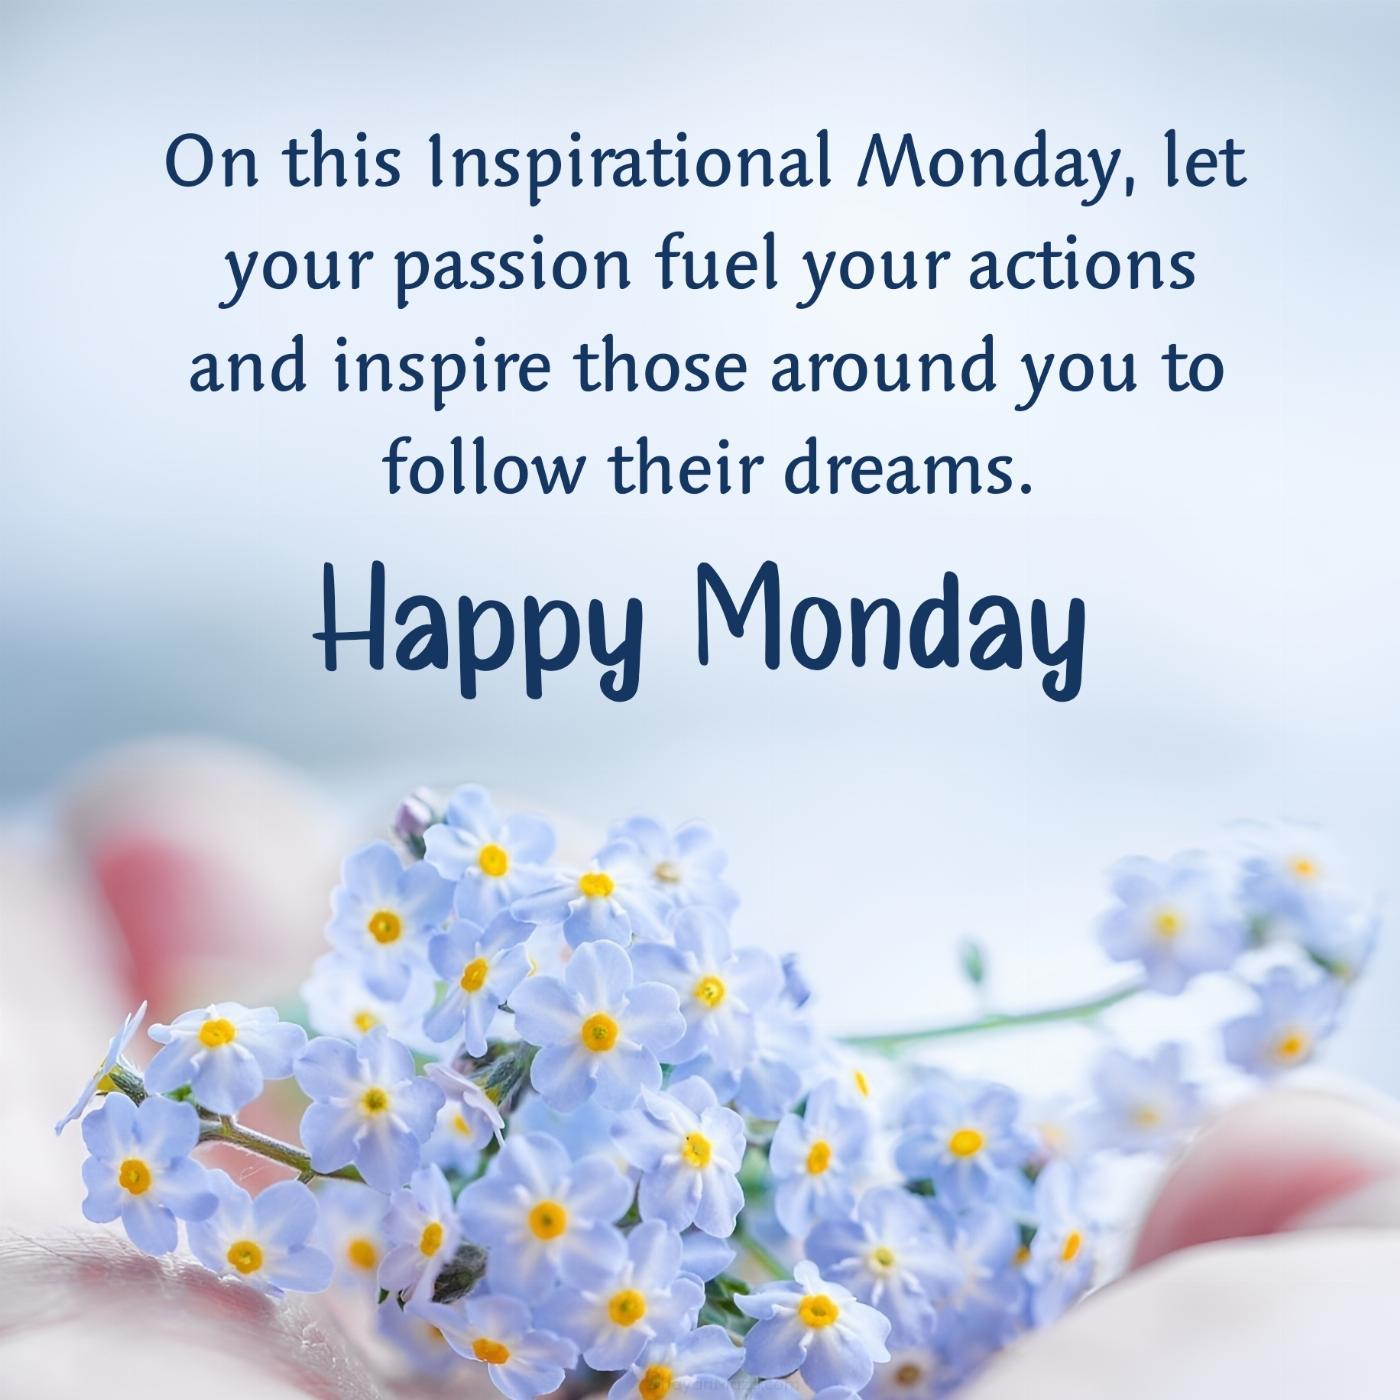 On this Inspirational Monday let your passion fuel your actions